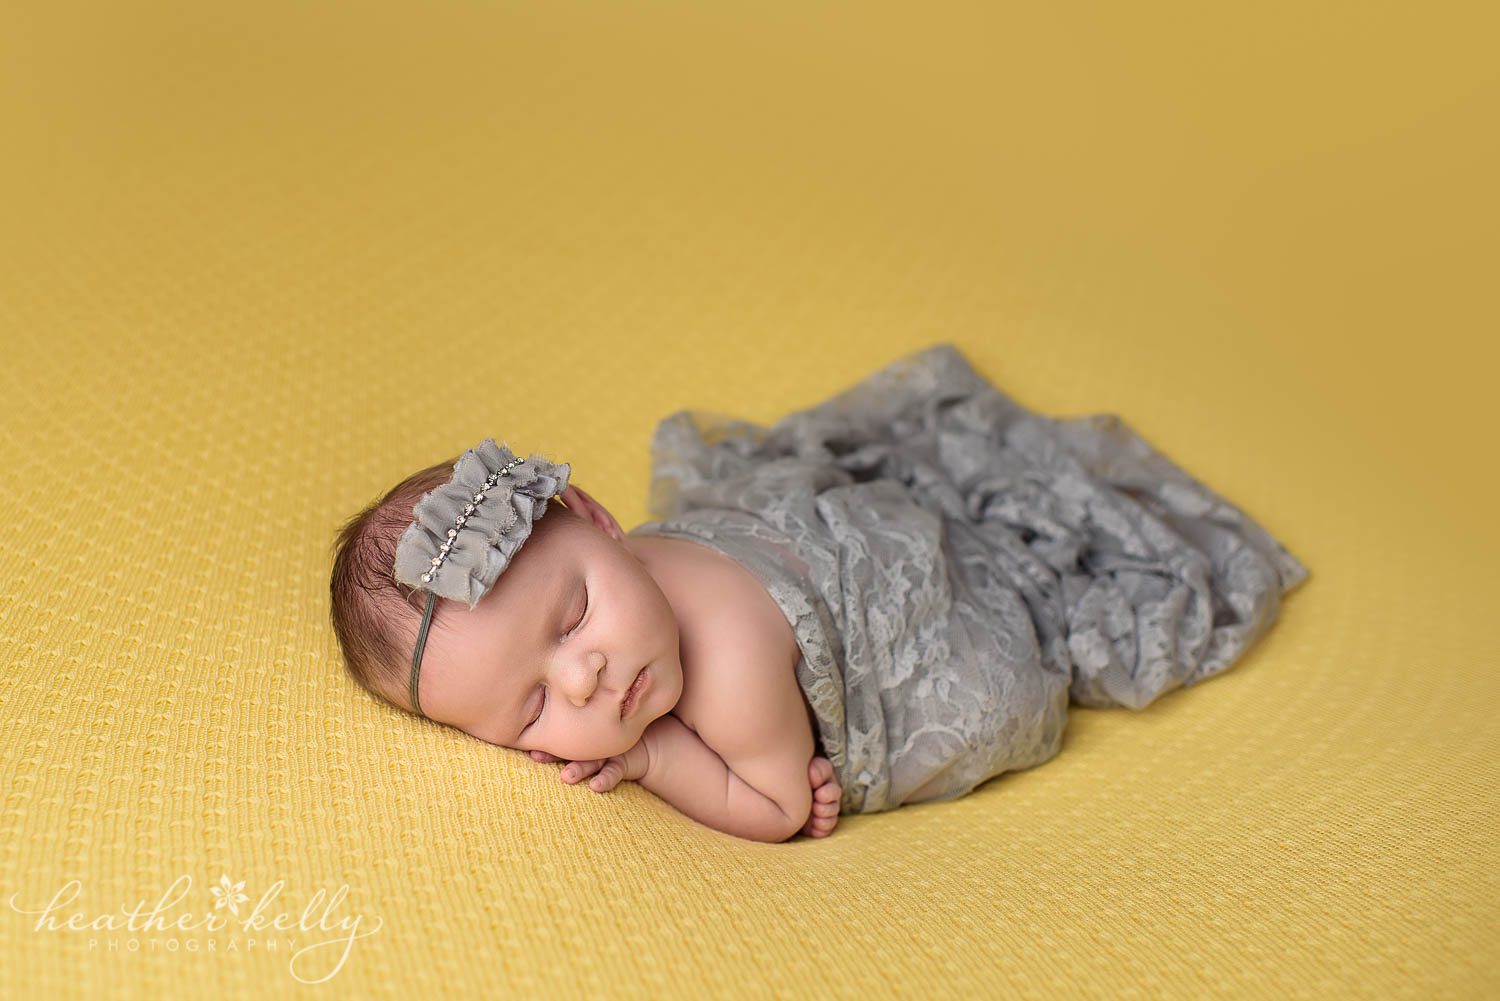 modified taco with wrap. newborn photography poses